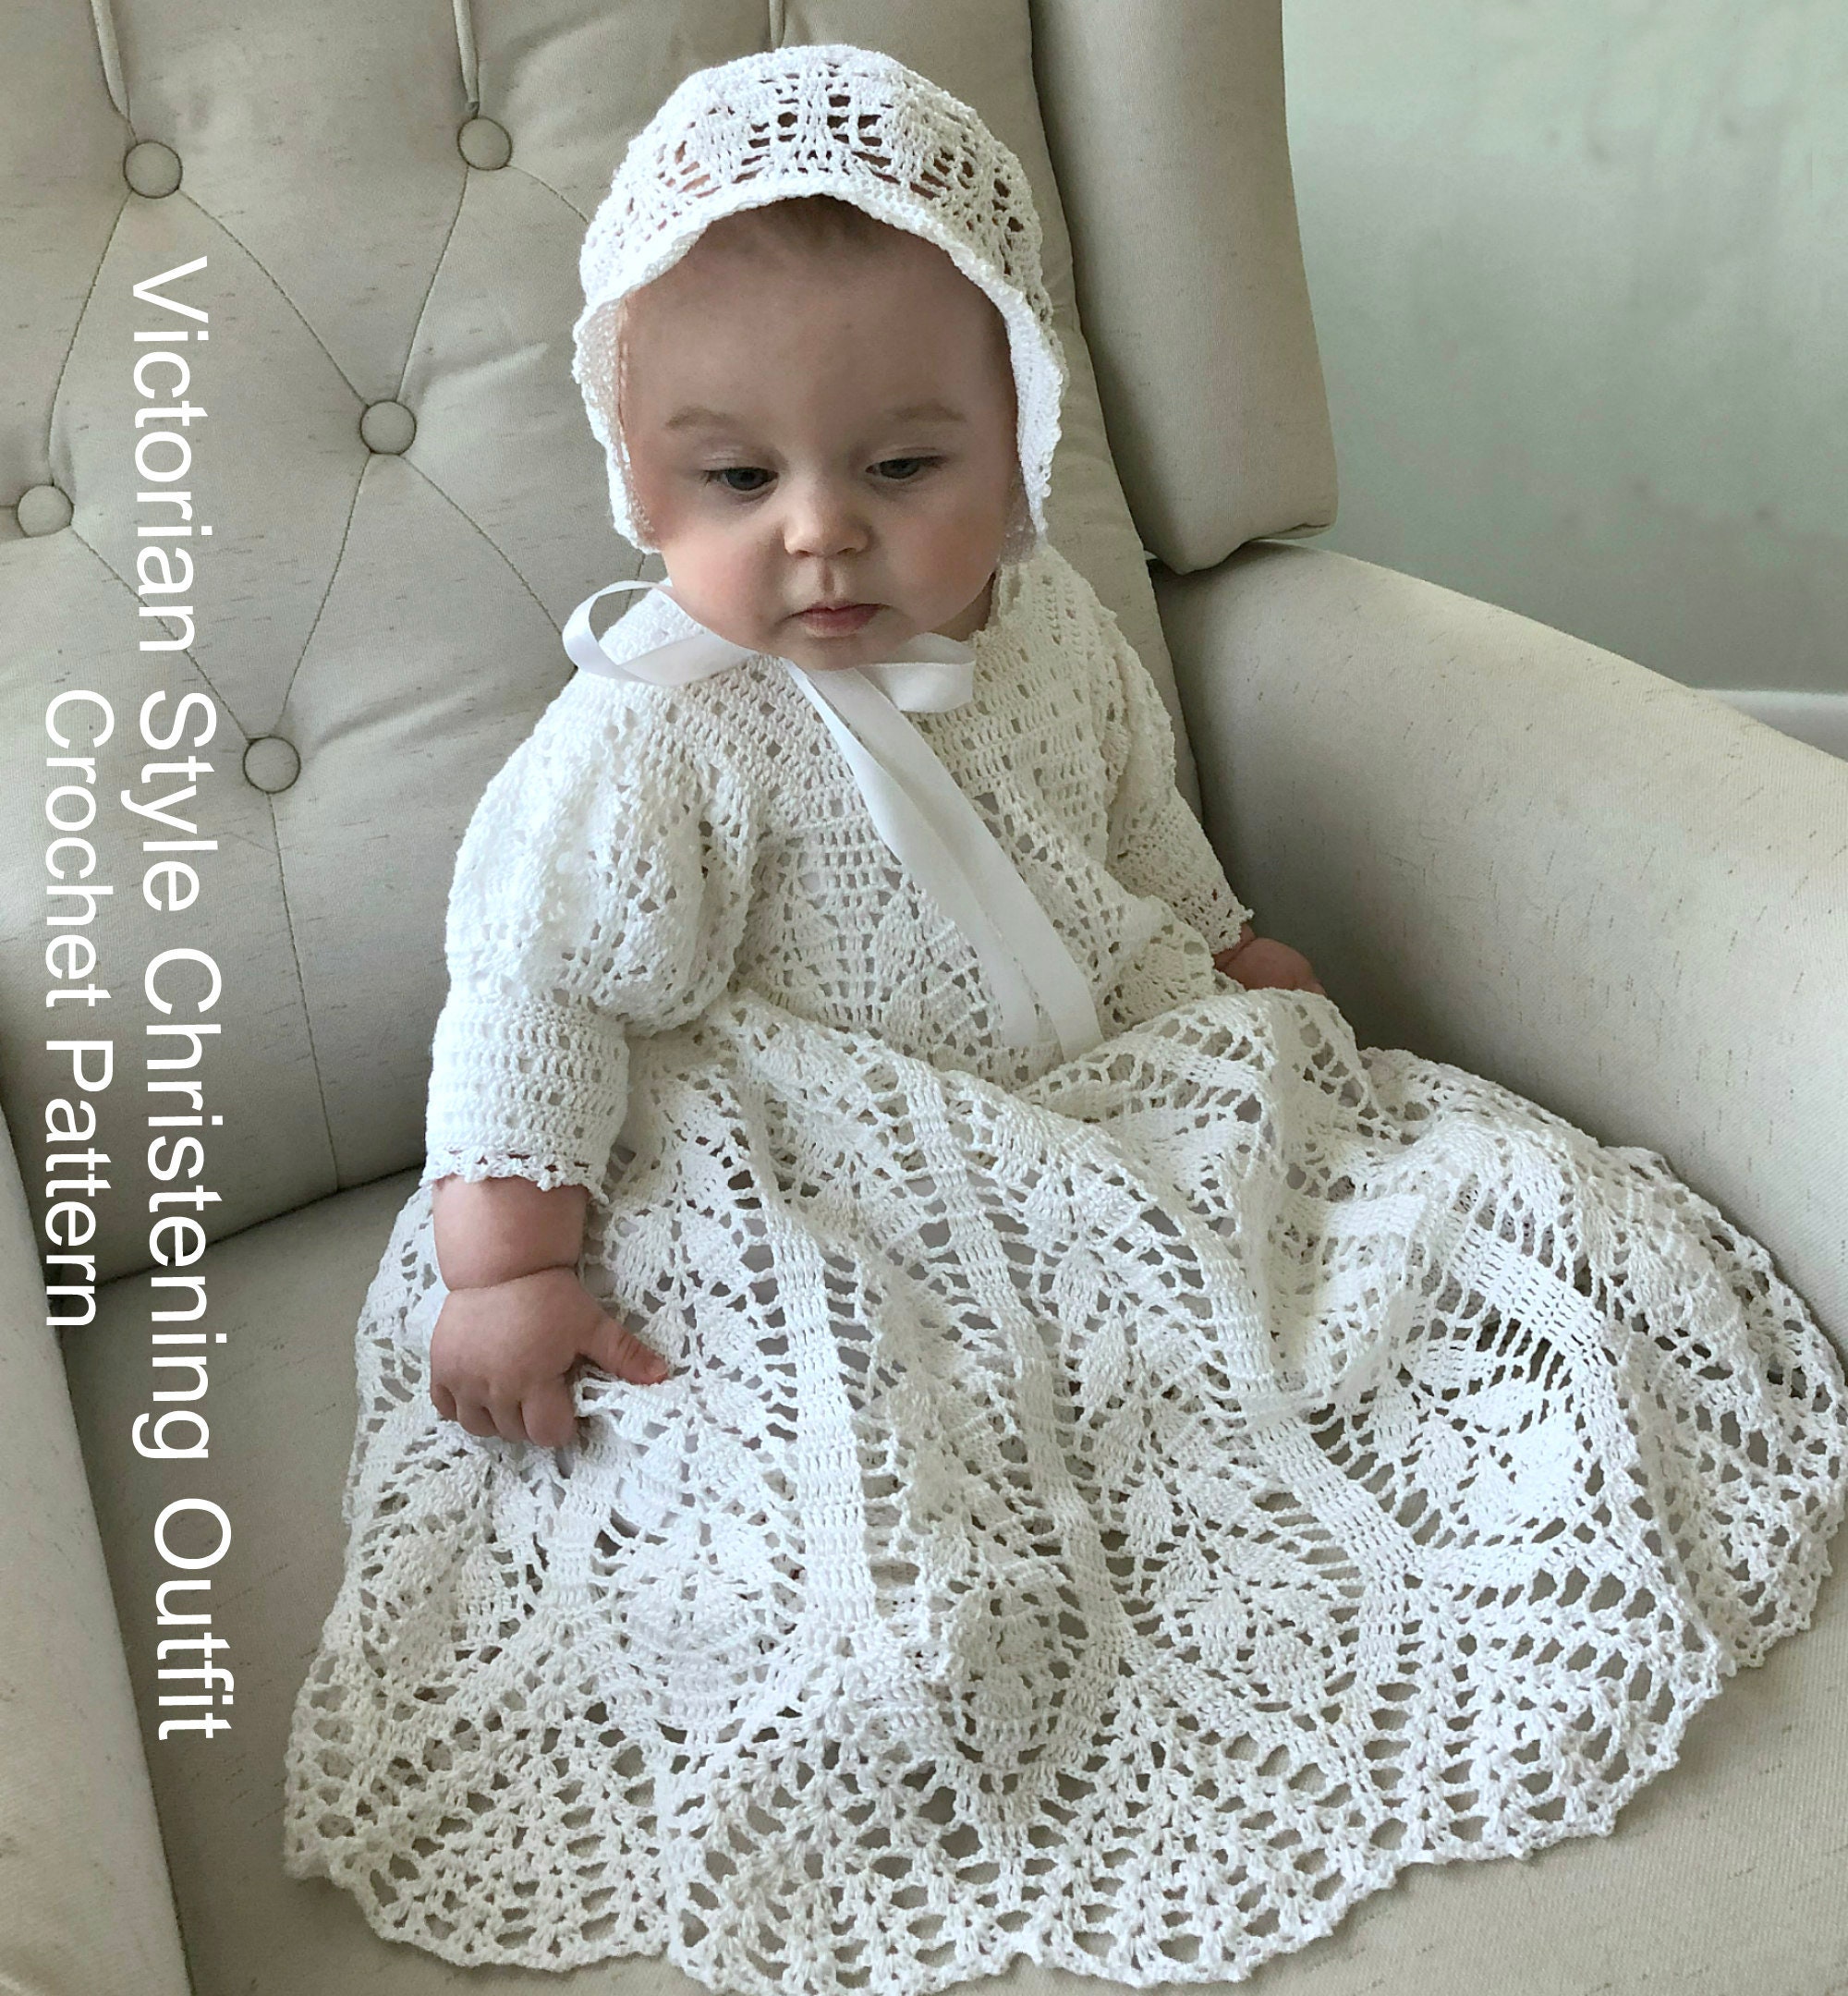 Ravelry: Ella Rose Christening Gown and Bonnet pattern by Sonya Gibbons